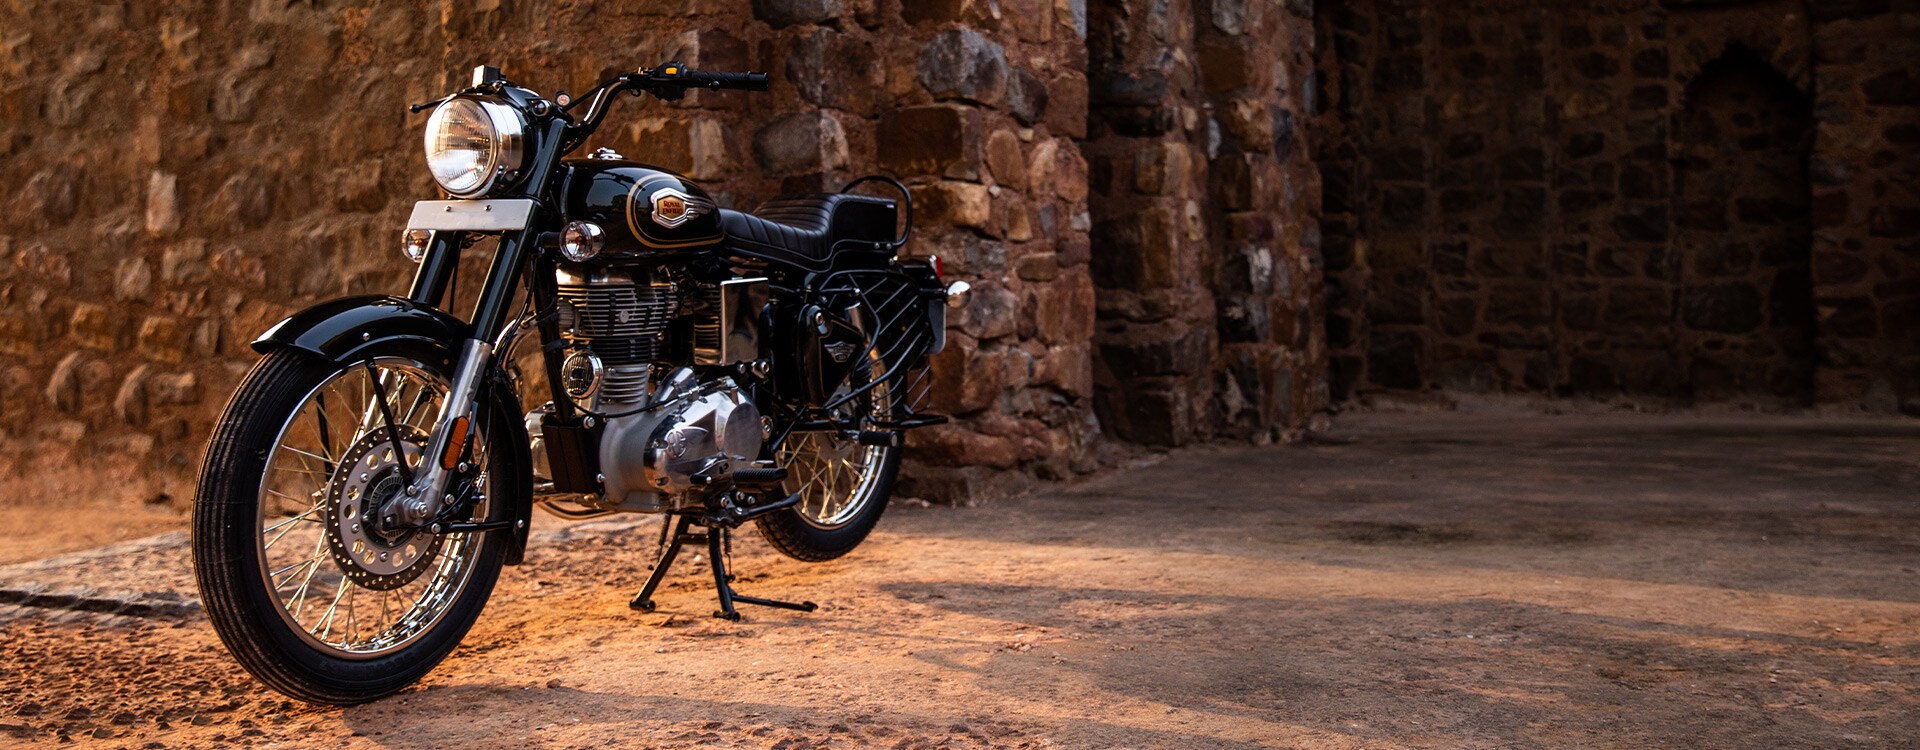 Living with an Iron Barrel Royal Enfield Bullet 500  Rider Magazine